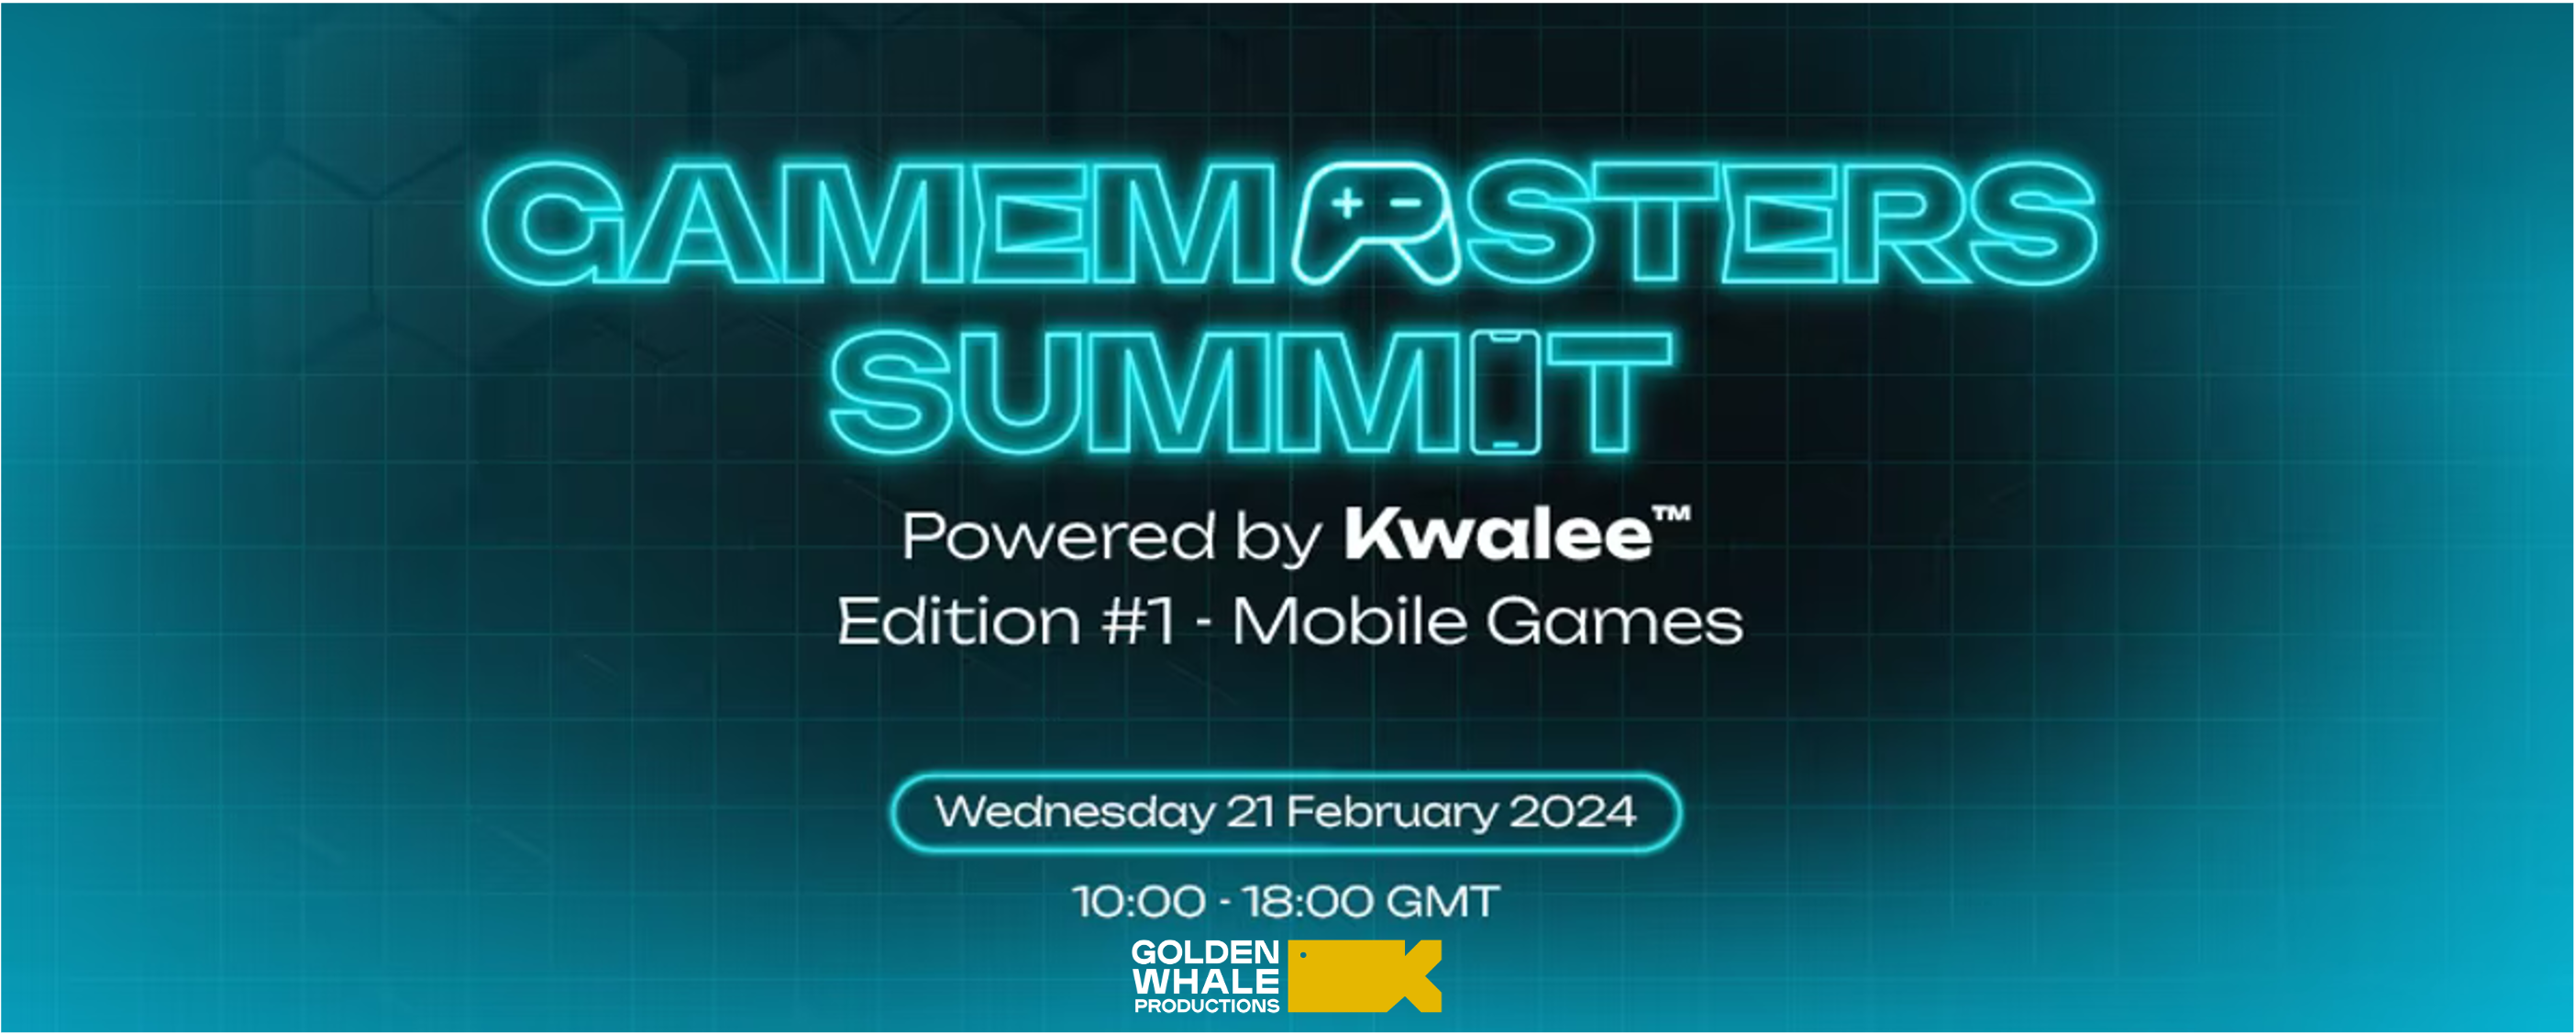 Golden Whale at Gamemasters Summit 2024